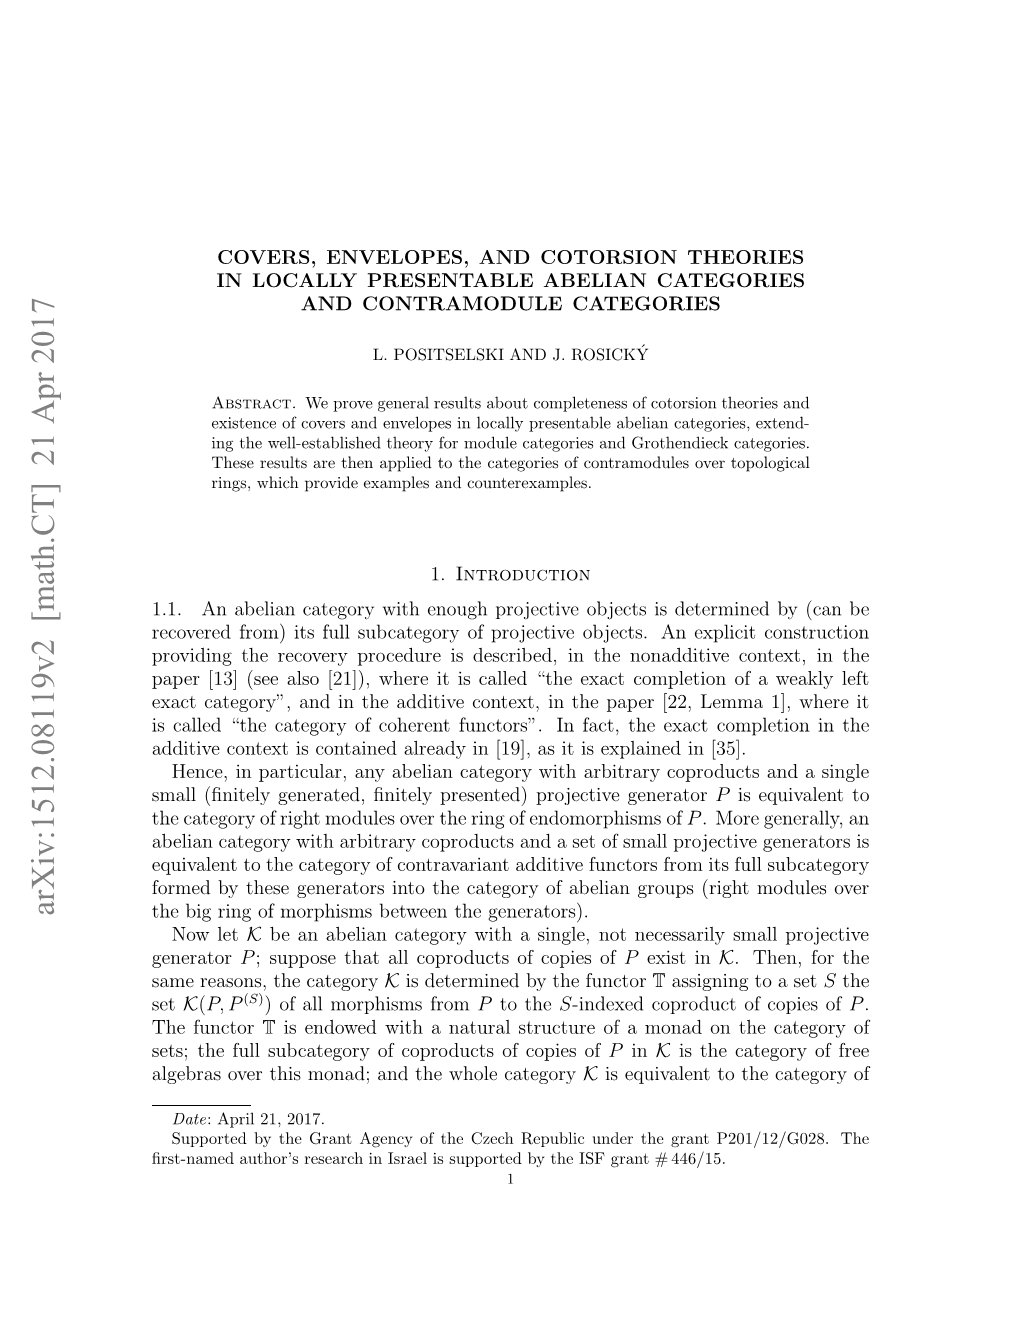 Covers, Envelopes, and Cotorsion Theories in Locally Presentable